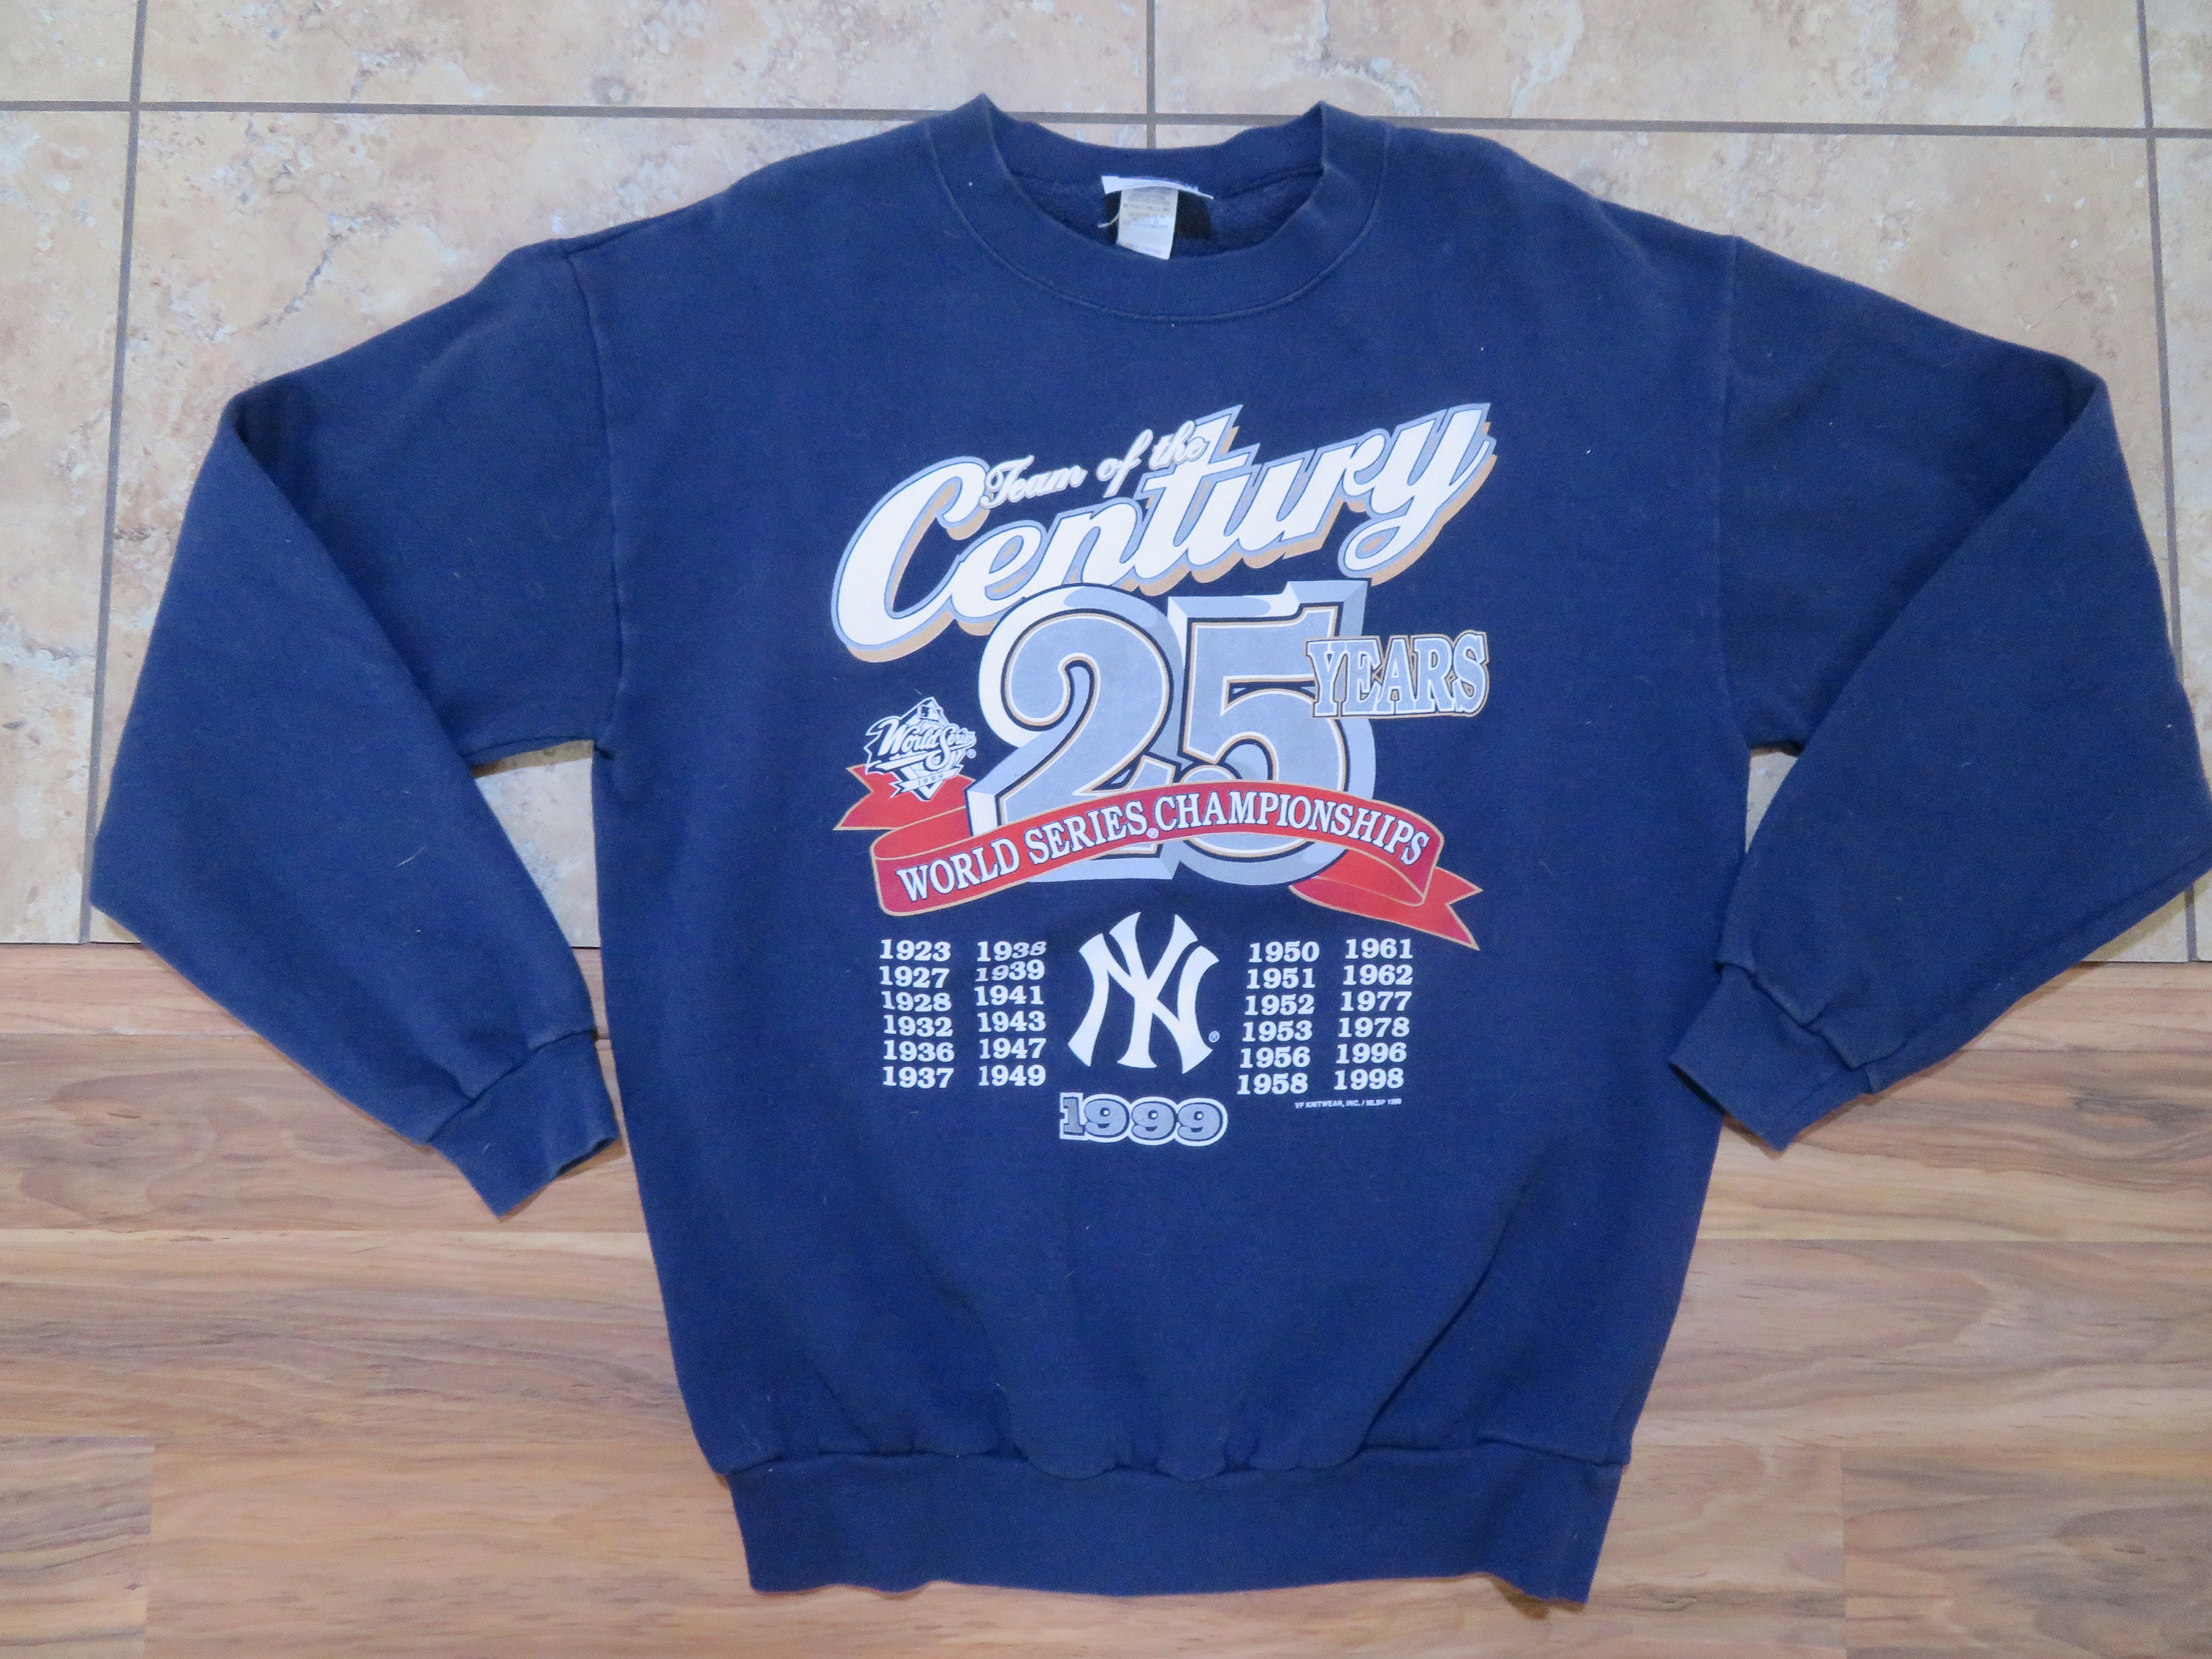 Buy Youth MLB?Crewneck Baseball Jersey by Majestic Athletics Style Number  1928